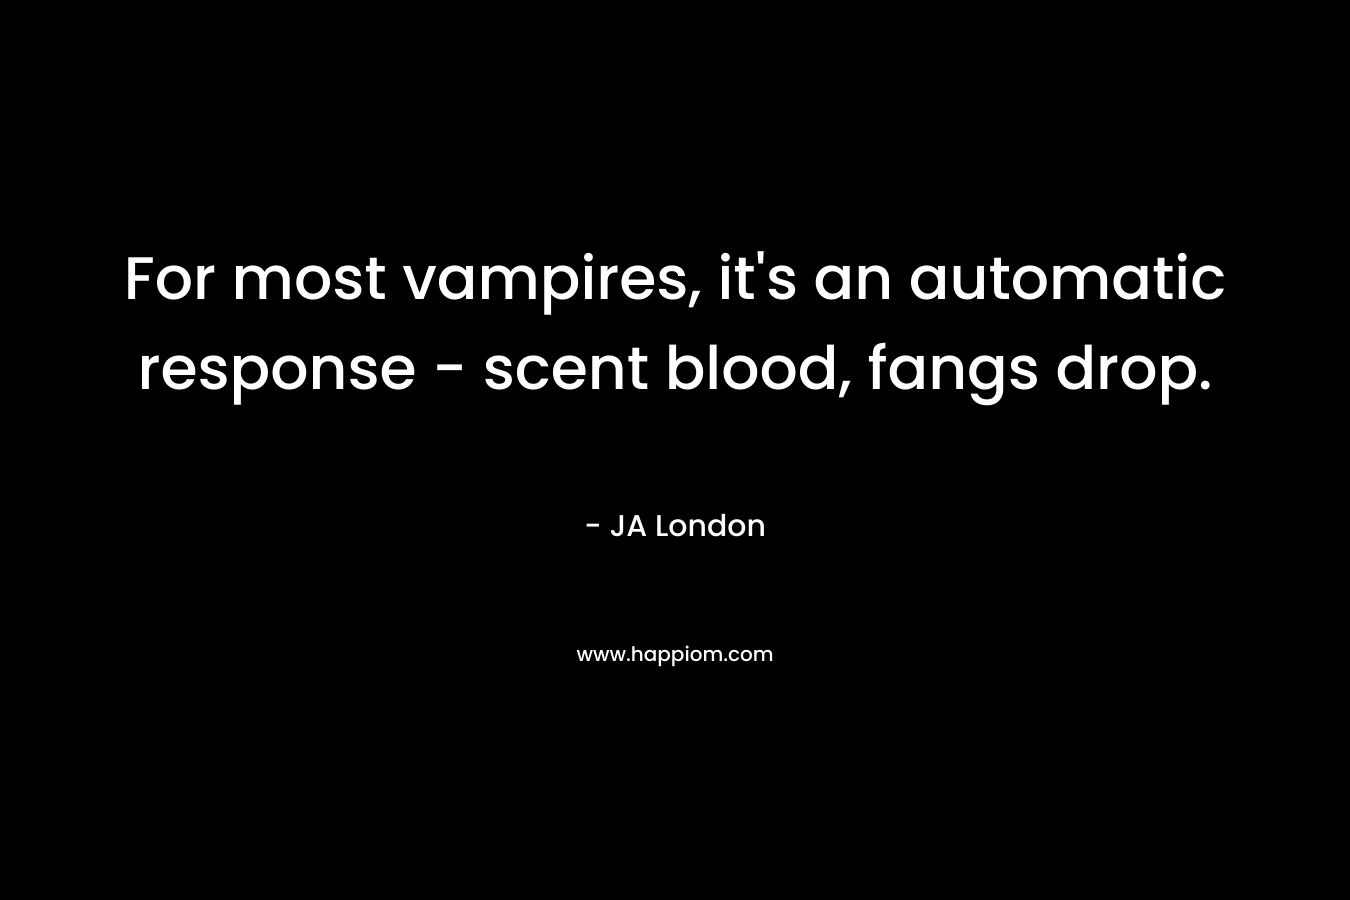 For most vampires, it's an automatic response - scent blood, fangs drop.